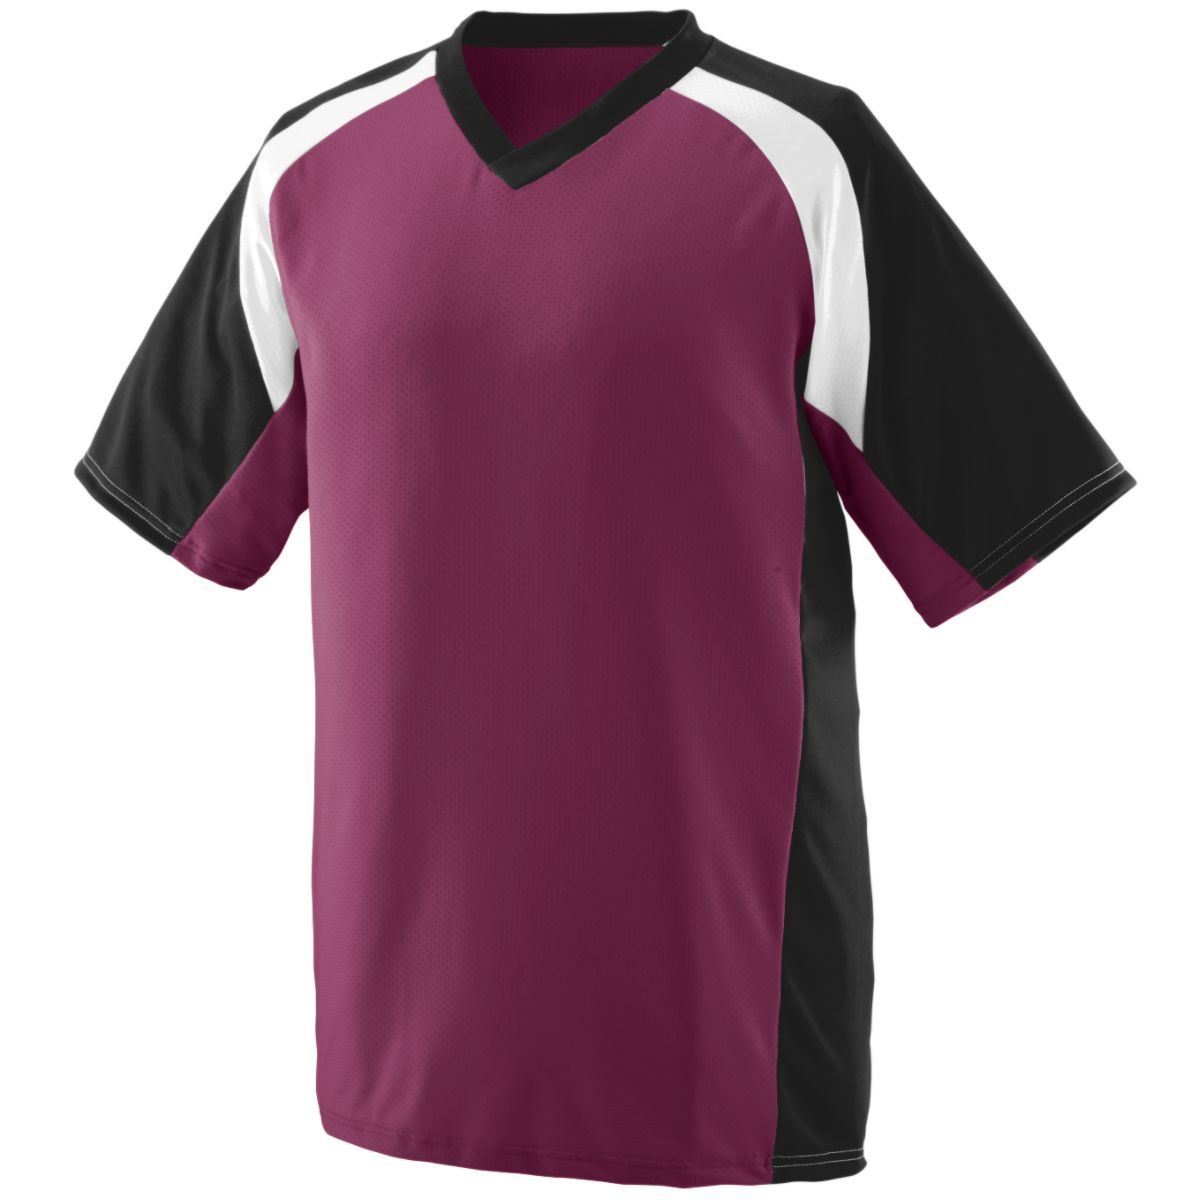 Augusta Sportswear Youth Nitro Jersey in Maroon/Black/White  -Part of the Youth, Youth-Jersey, Augusta-Products, Football, Shirts, All-Sports, All-Sports-1 product lines at KanaleyCreations.com